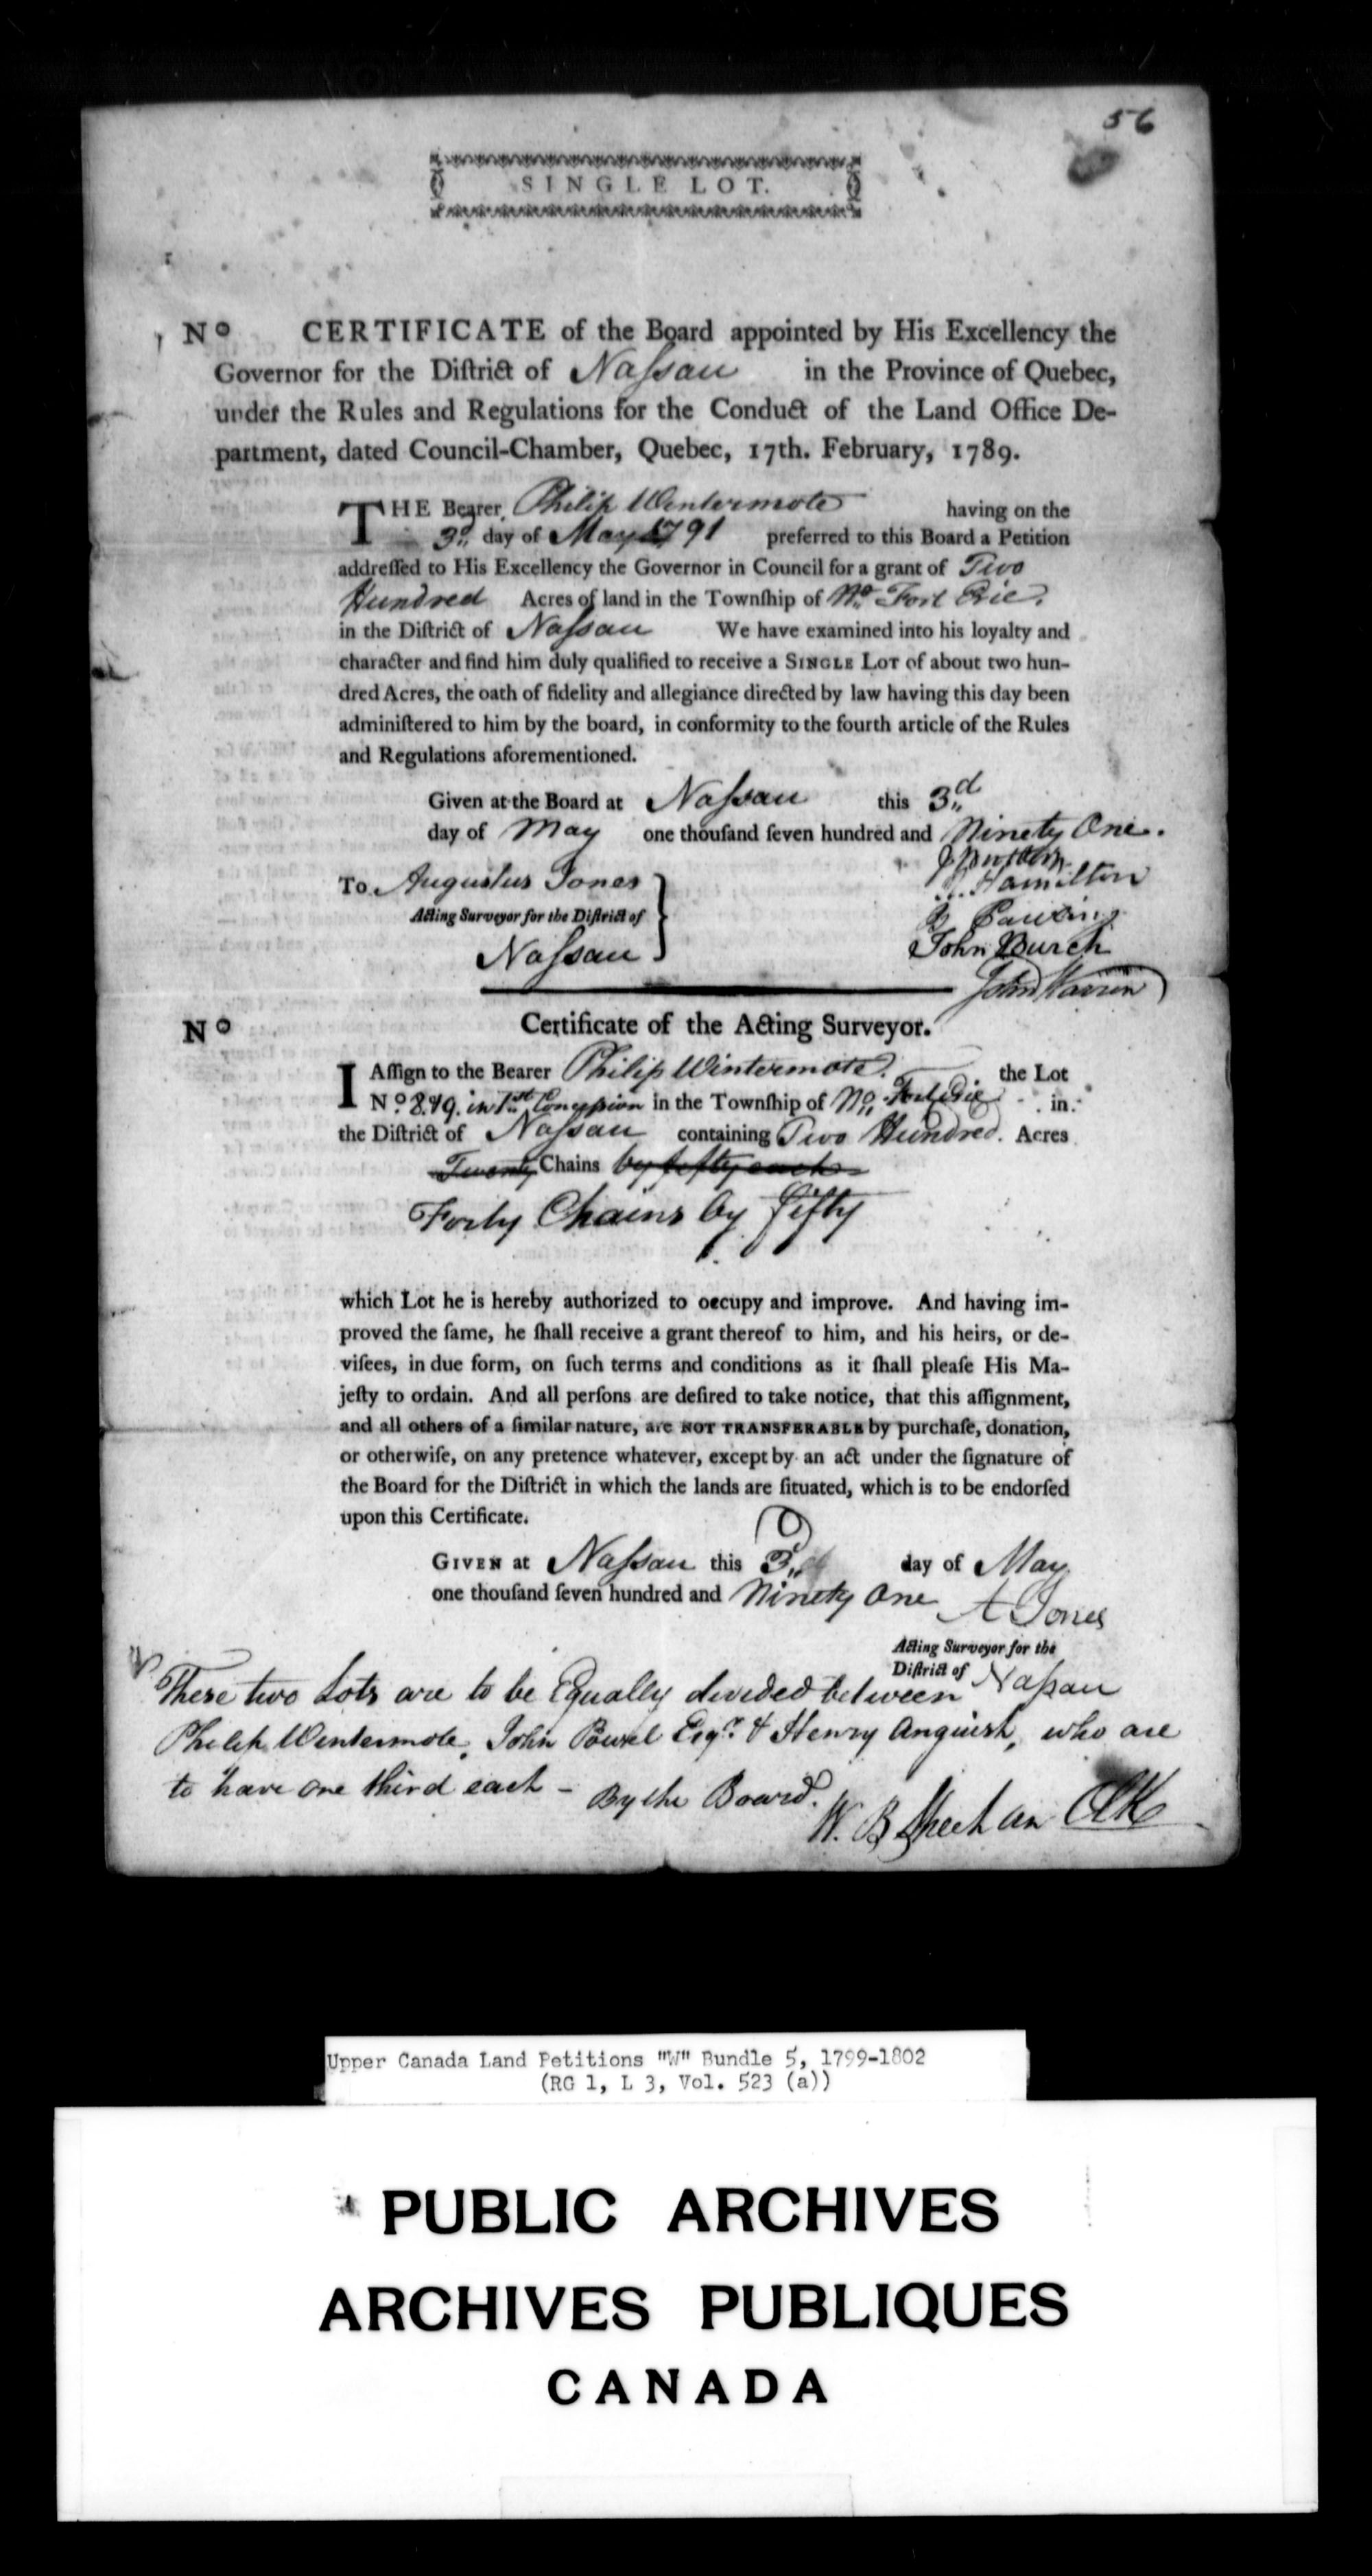 Title: Upper Canada Land Petitions (1763-1865) - Mikan Number: 205131 - Microform: c-2951